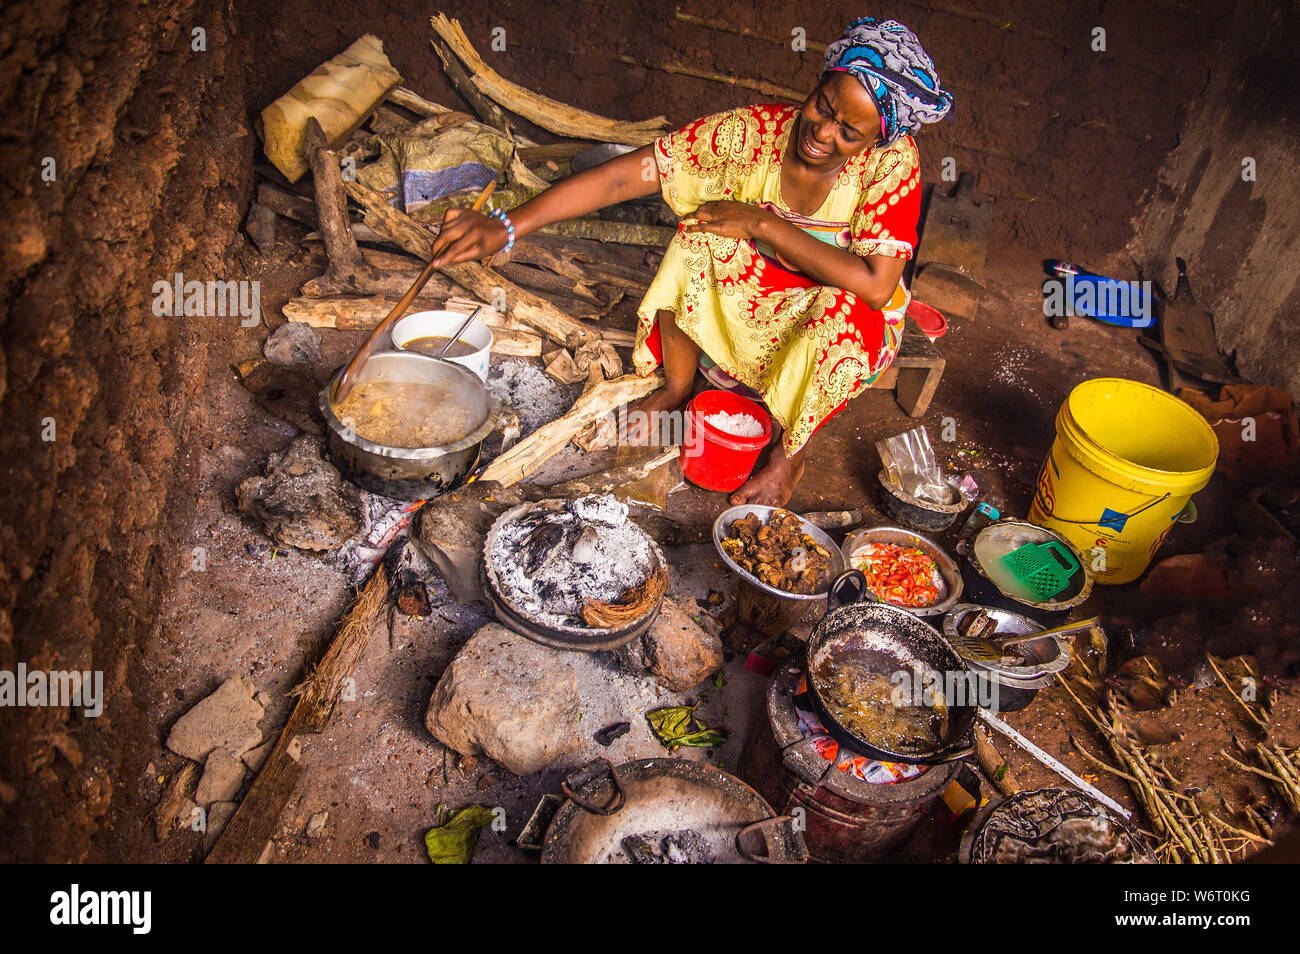 Zanzibar, Tanzania, March 29, 2018 an African woman in national clothes cooks a simple national meal in an old dirty dish in a hut on an earthen floor Stock Photo